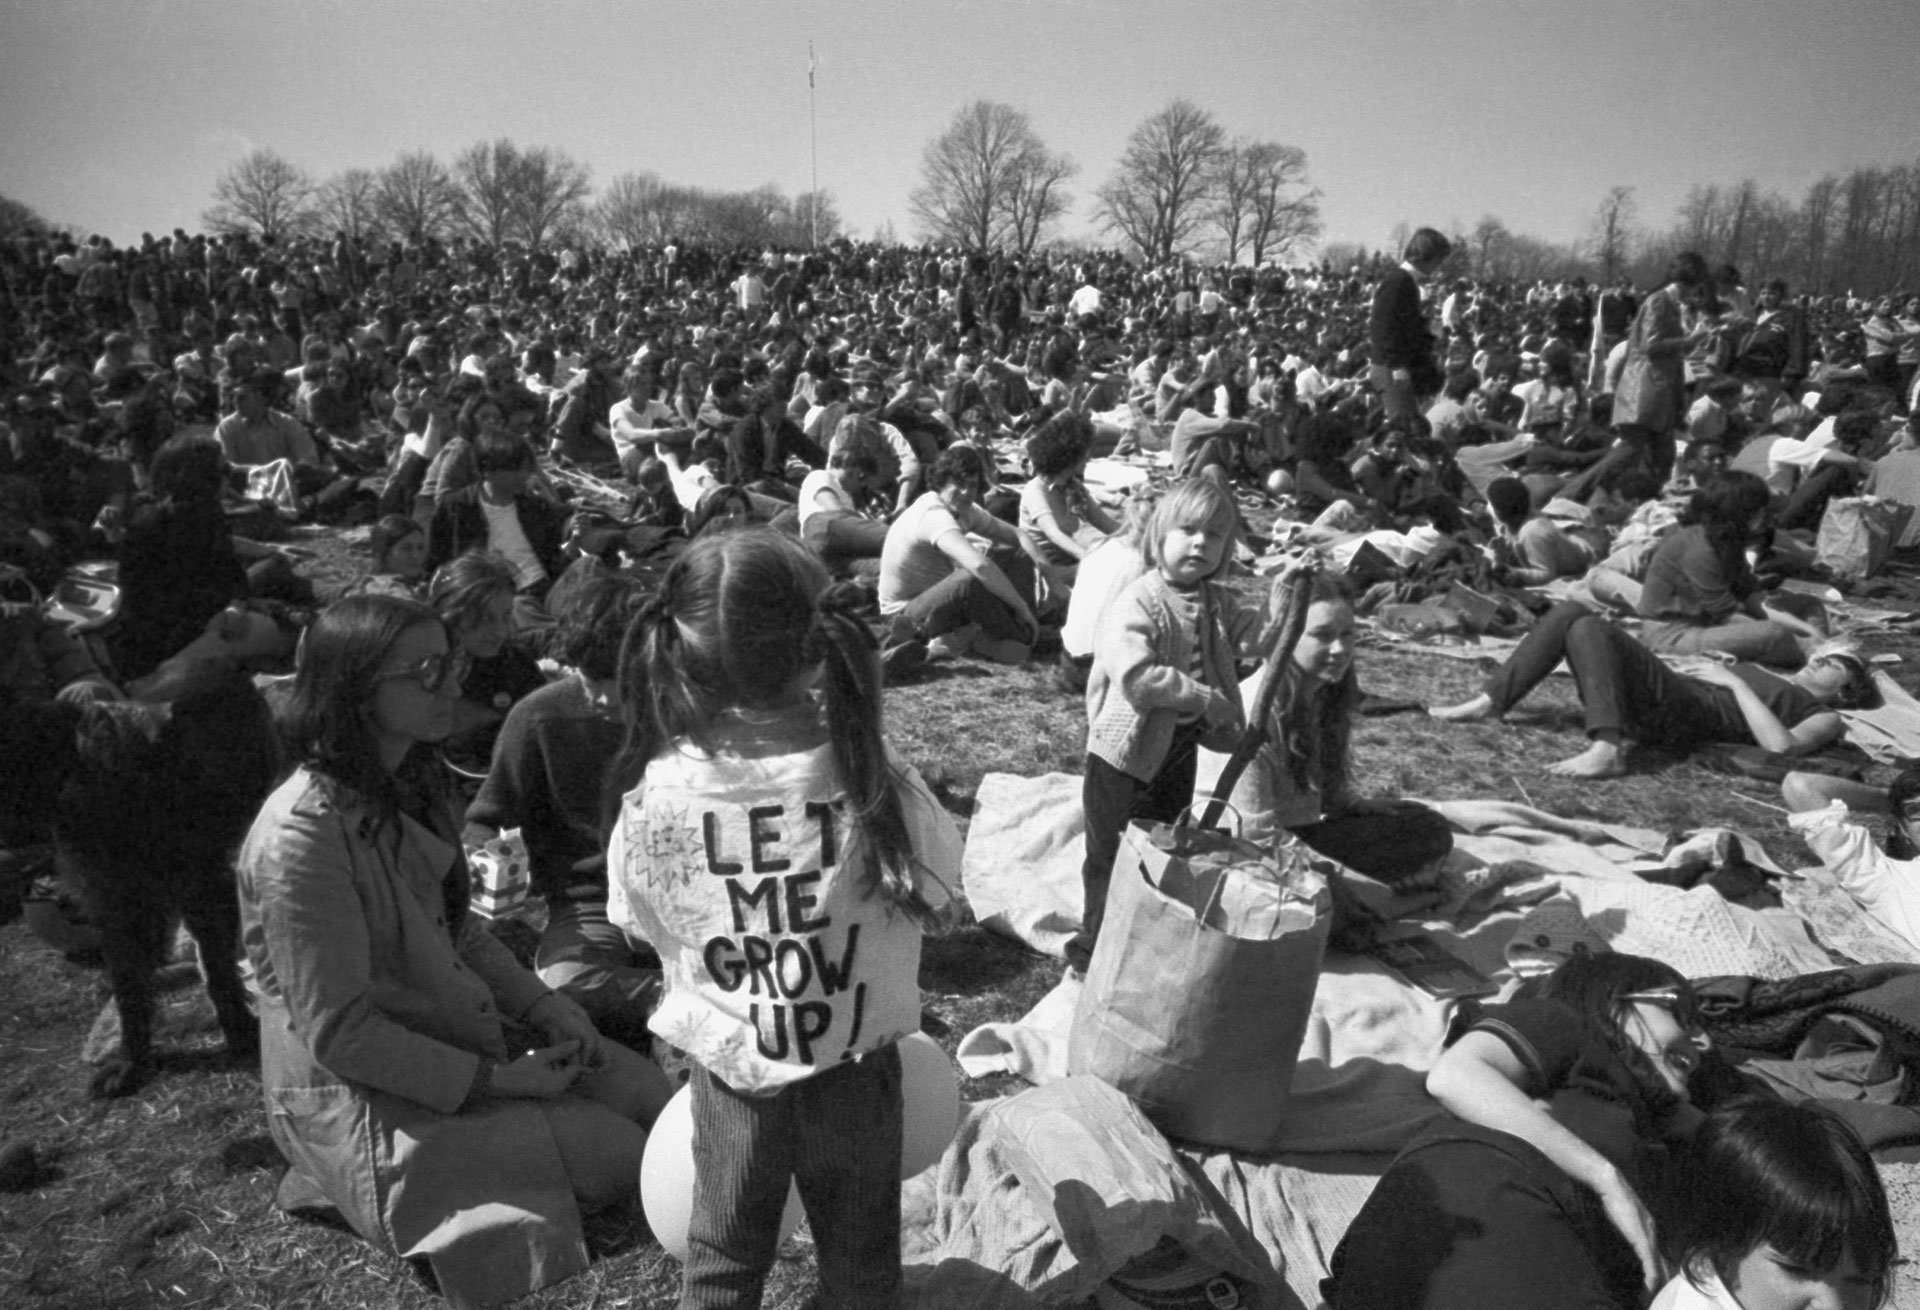 People gathered in Philadelphia's Fairmount Park to observe the first Earth Day on April 22, 1970.